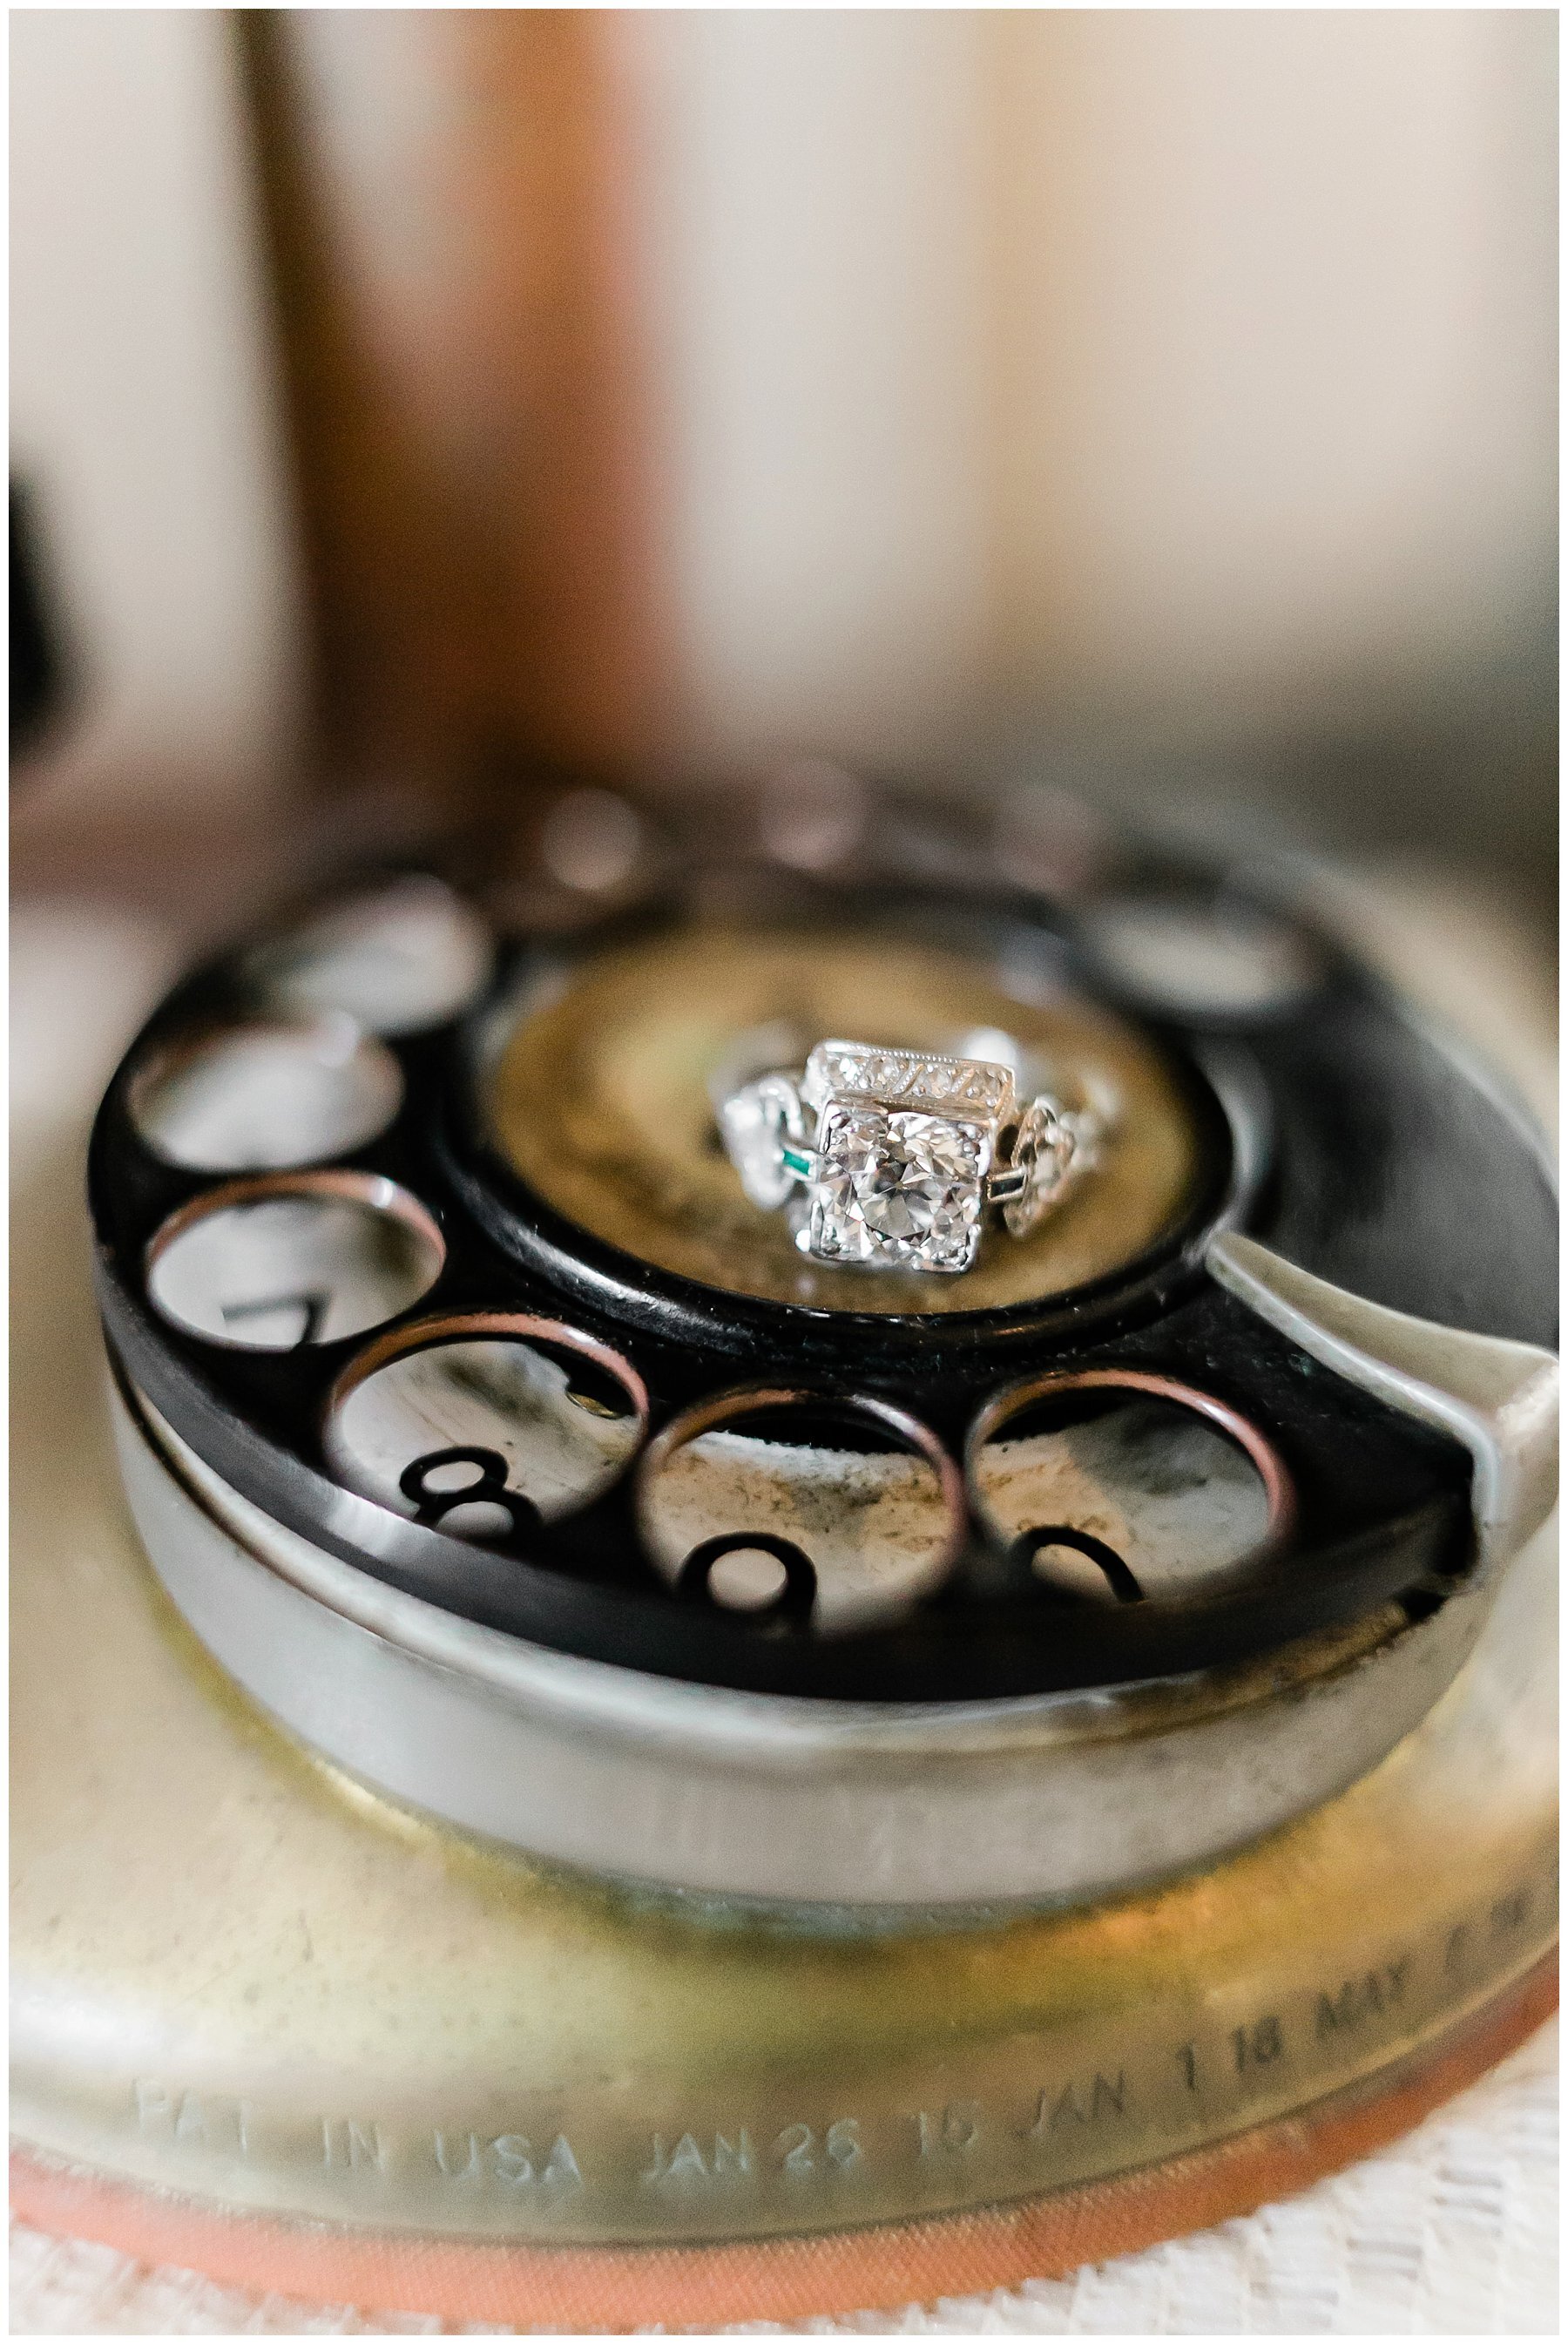  wedding bands on a rotary phone 